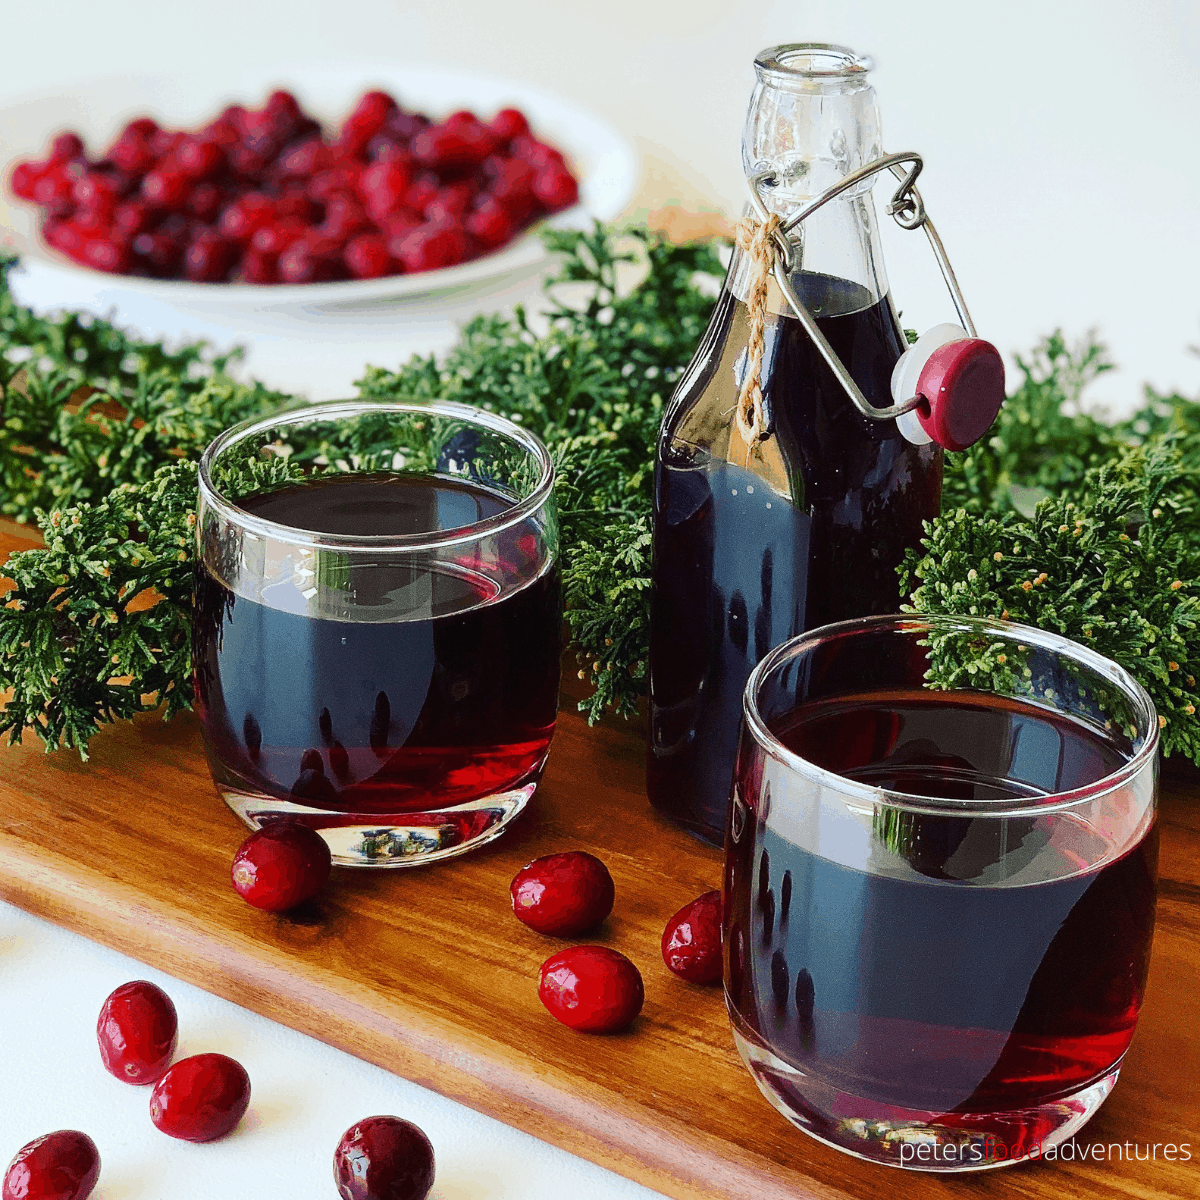 A homemade Cranberry Juice recipe that is luscious and refreshing. Made of whole cranberries, filled with vitamins, sweetened with sugar or honey. A worthwhile summer drink, or vacation treat. Cranberry Mors Drink (морс) Cranberry Mors Drink (морс) Pure Cranb Cranberry Mors Drink (морс) Pure Cranb cranberry juice recipe